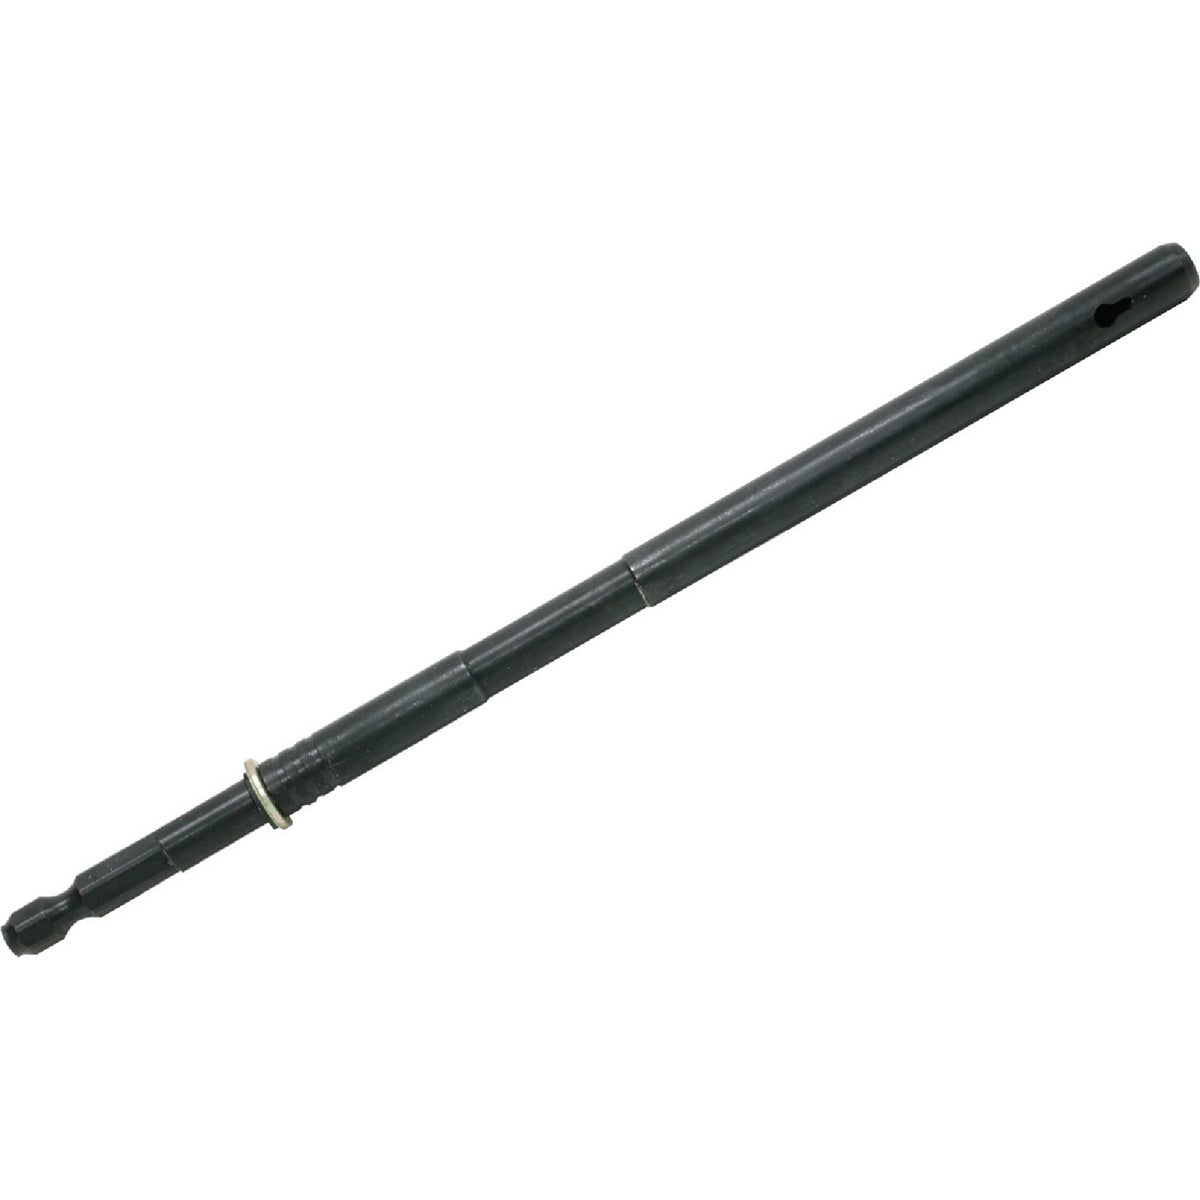 Item 323581, Replacement attachment mandrel for Quick Drive system.<br>
<br><b>No. PMANDREL75-RC:</b> Width: 1/4 In., Length: 7-1/2 In.